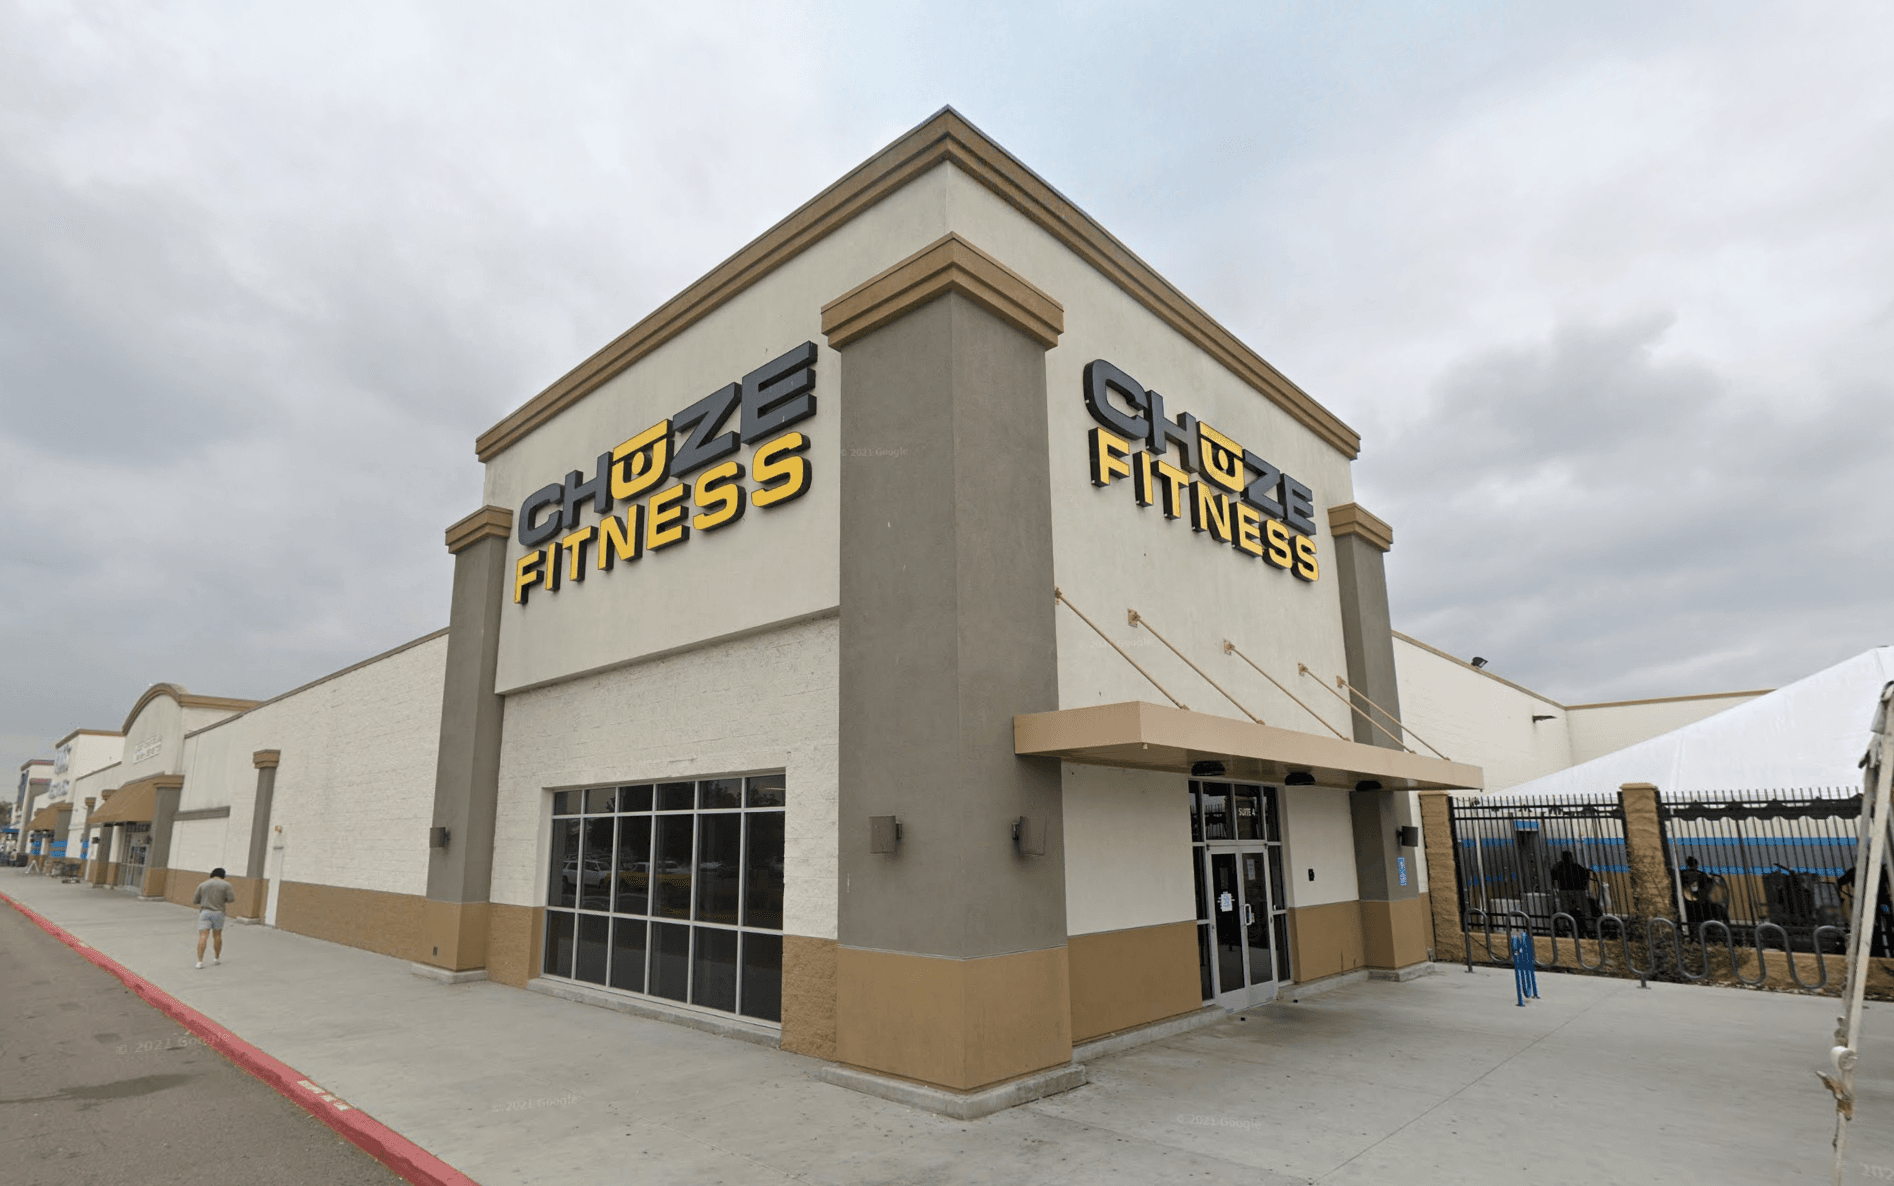 More Potential Exposures to Tuberculosis Found at 2 San Diego Chuze Fitness Locations